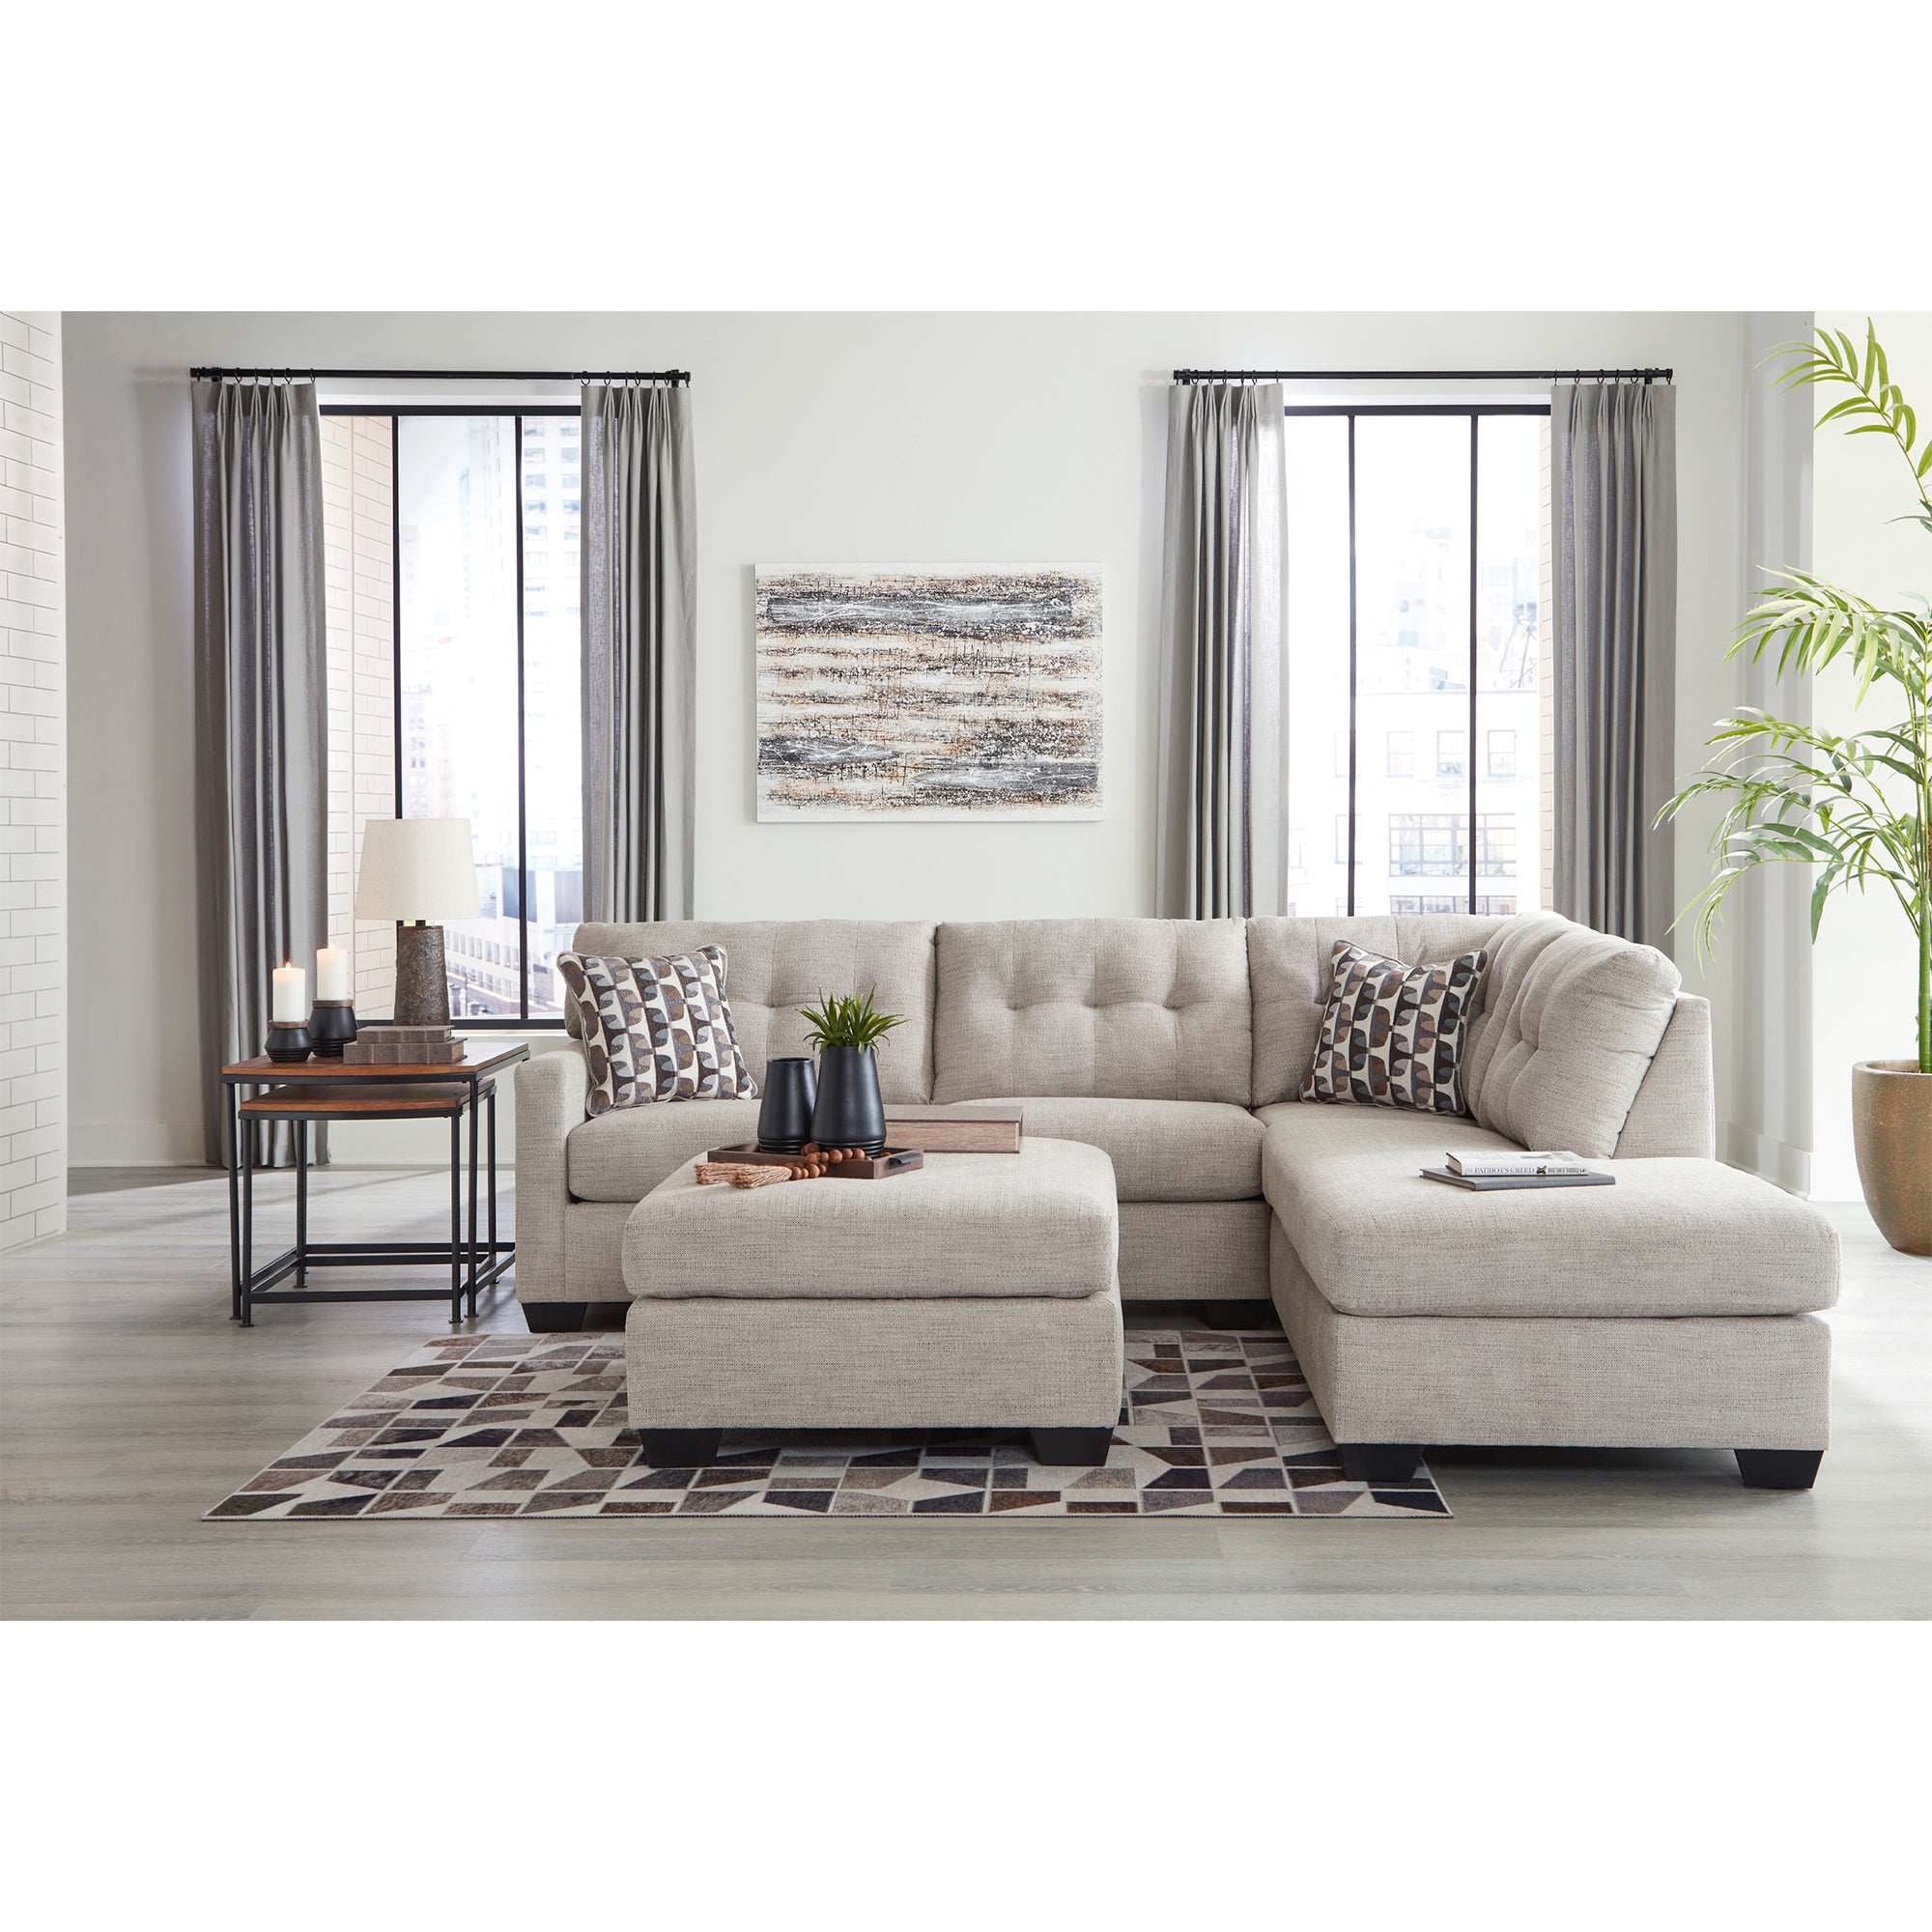 Contemporary Mahoney Sectional in pebble with comfortable chaise, ideal for lounging in Milwaukee